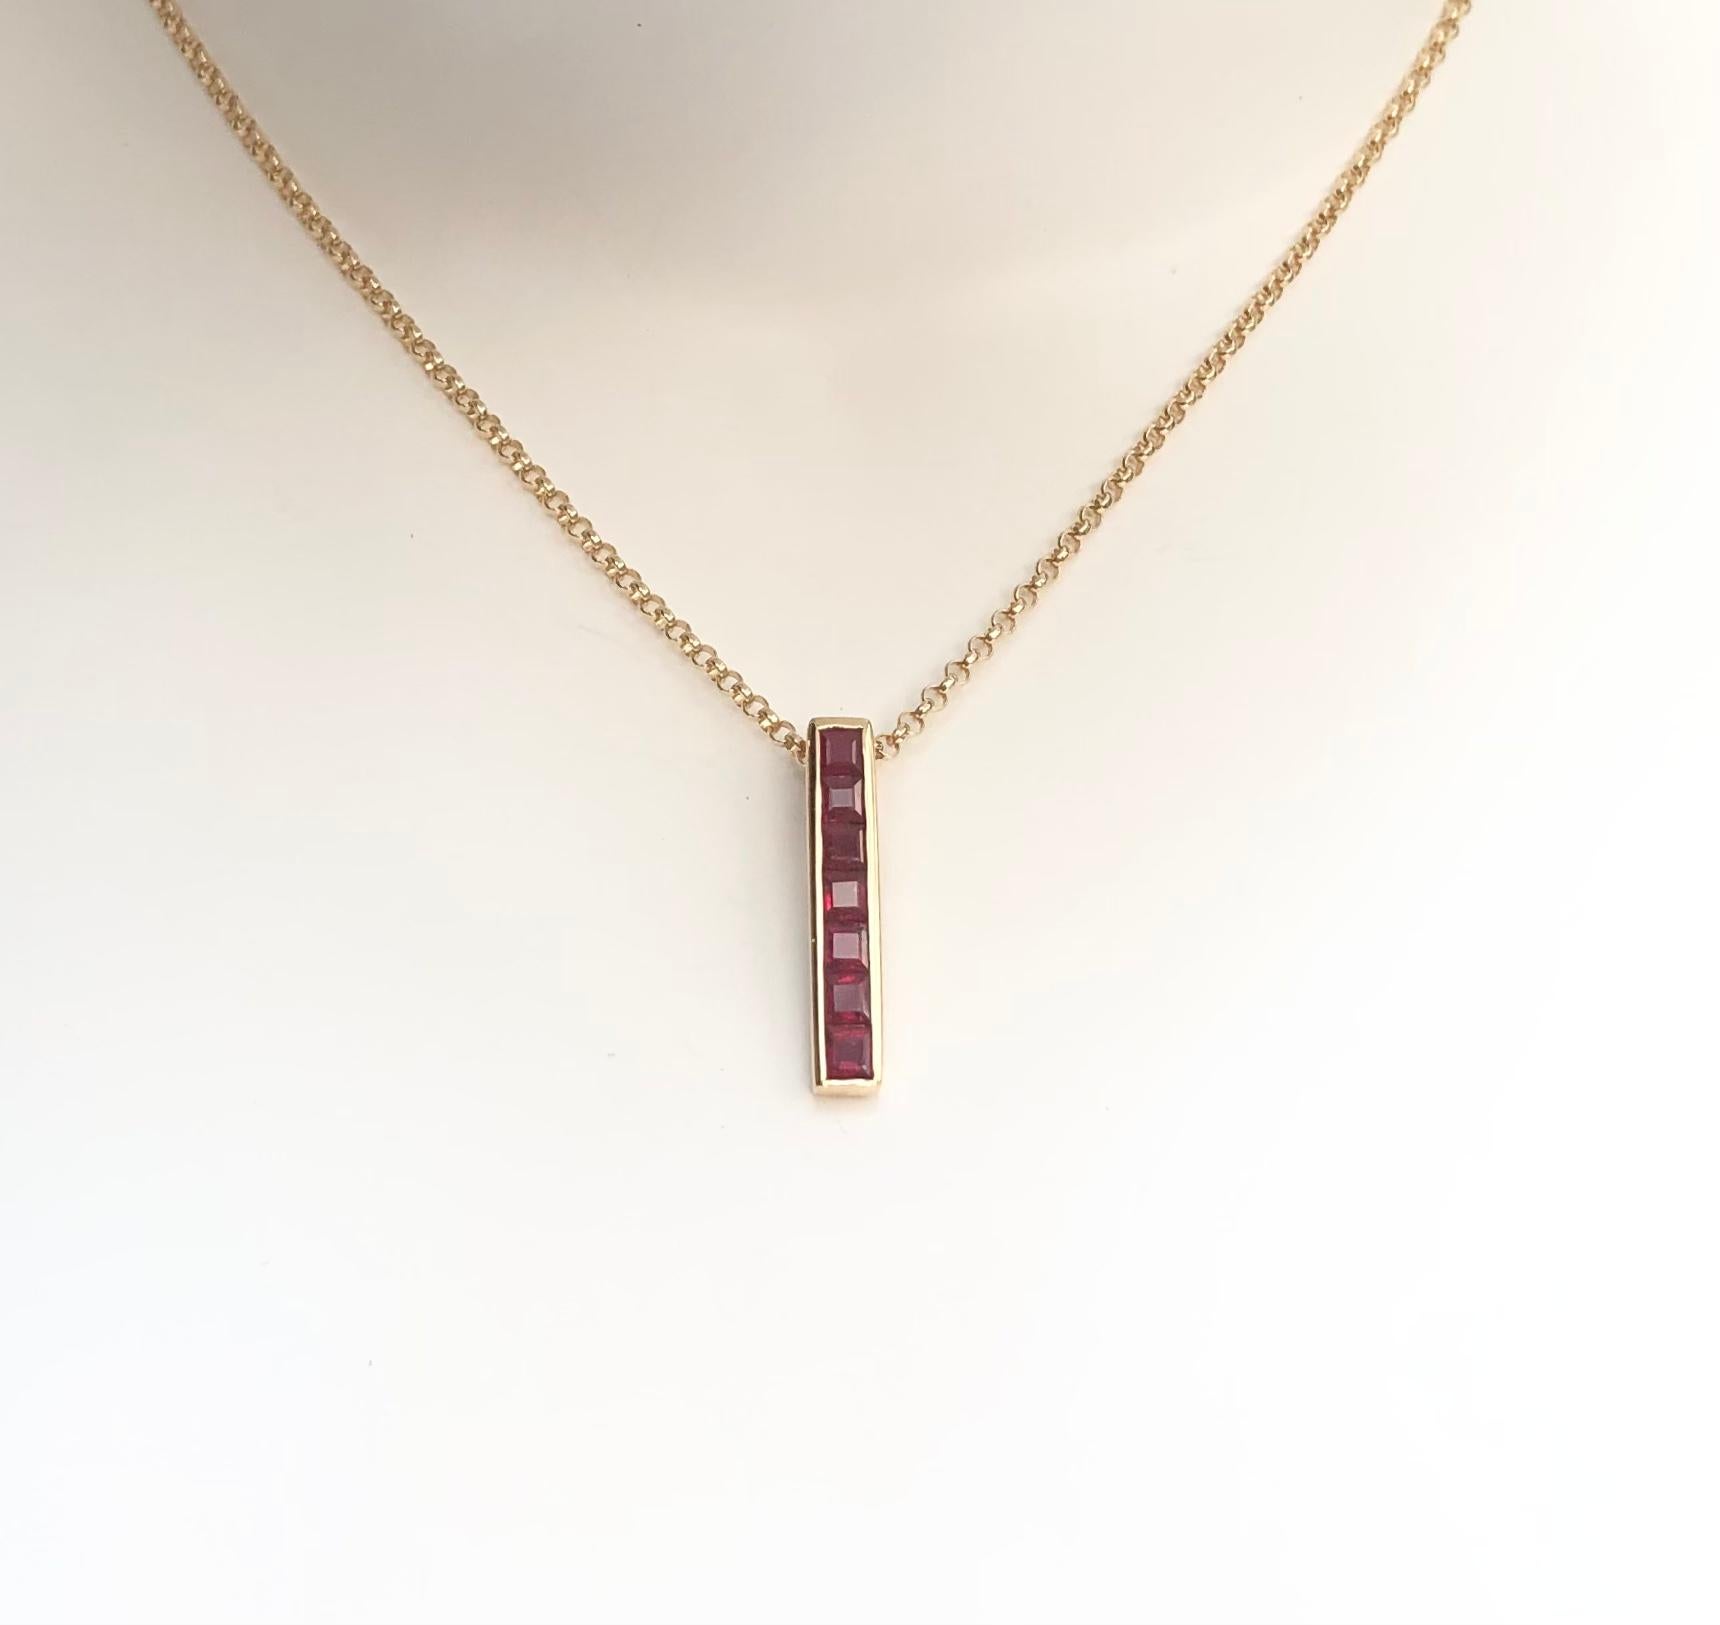 Ruby 1.30 carats Pendant set in 18 Karat Gold Settings
(chain not included)

Width: 0.4 cm 
Length: 2.2 cm
Total Weight: 1.64 grams

